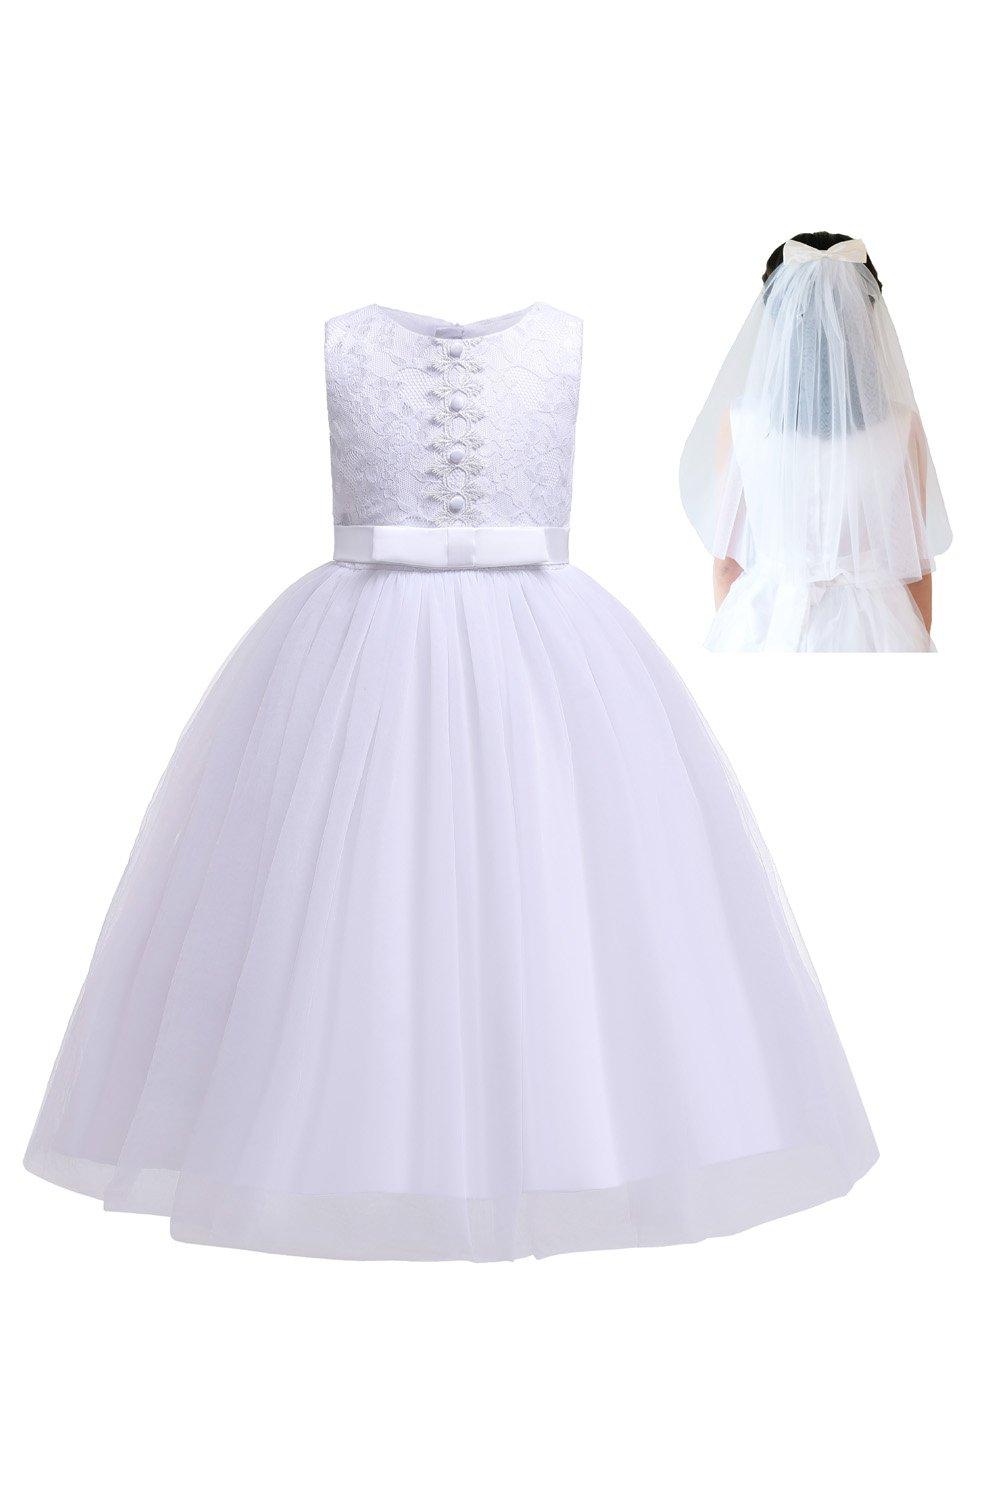 Holy Communion Dress with Veil